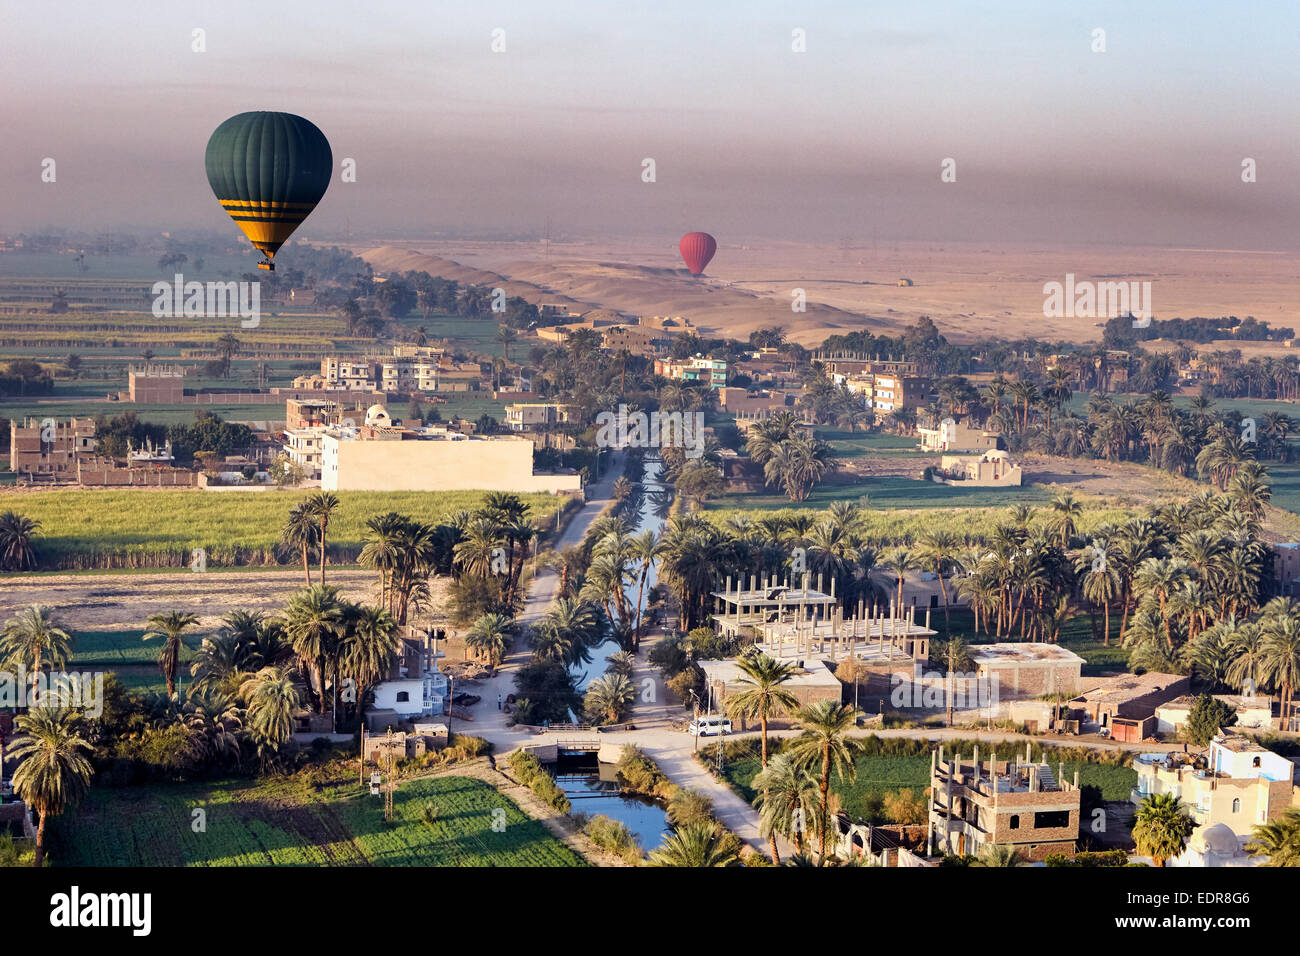 An early morning Balloon ride over Luxor in Egypt Stock Photo